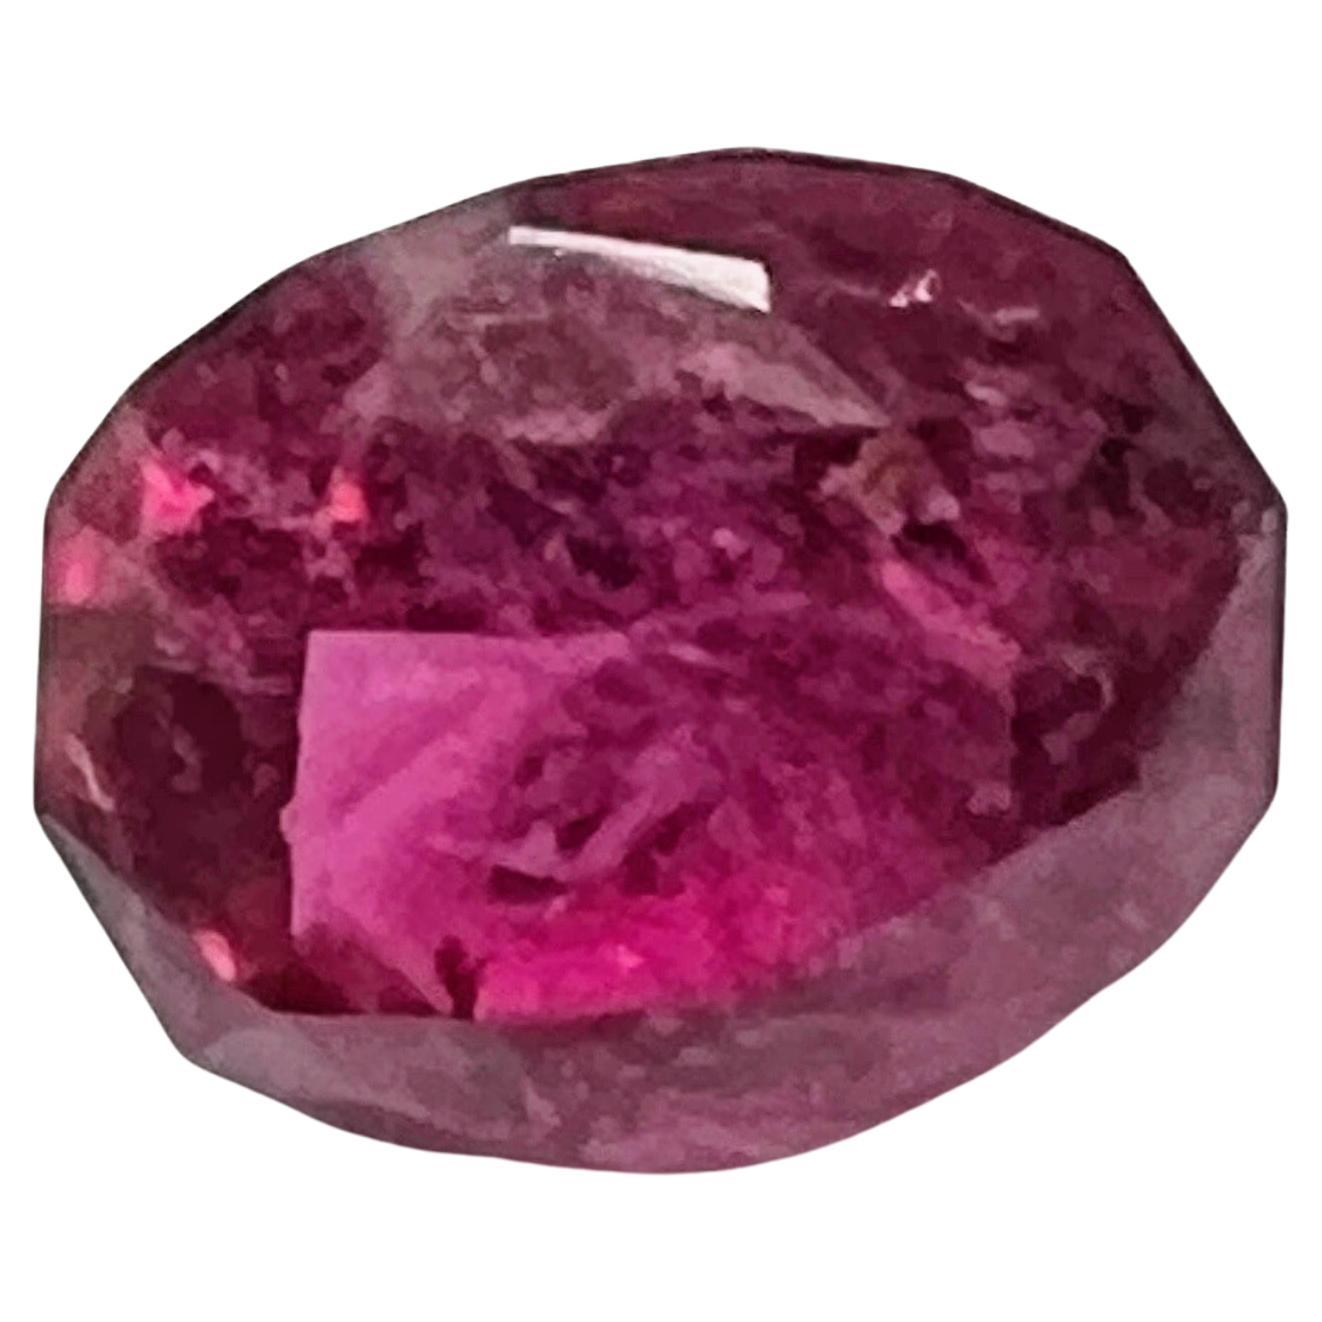 3.80ct Pink Oval Rubellite Gemstone For Sale